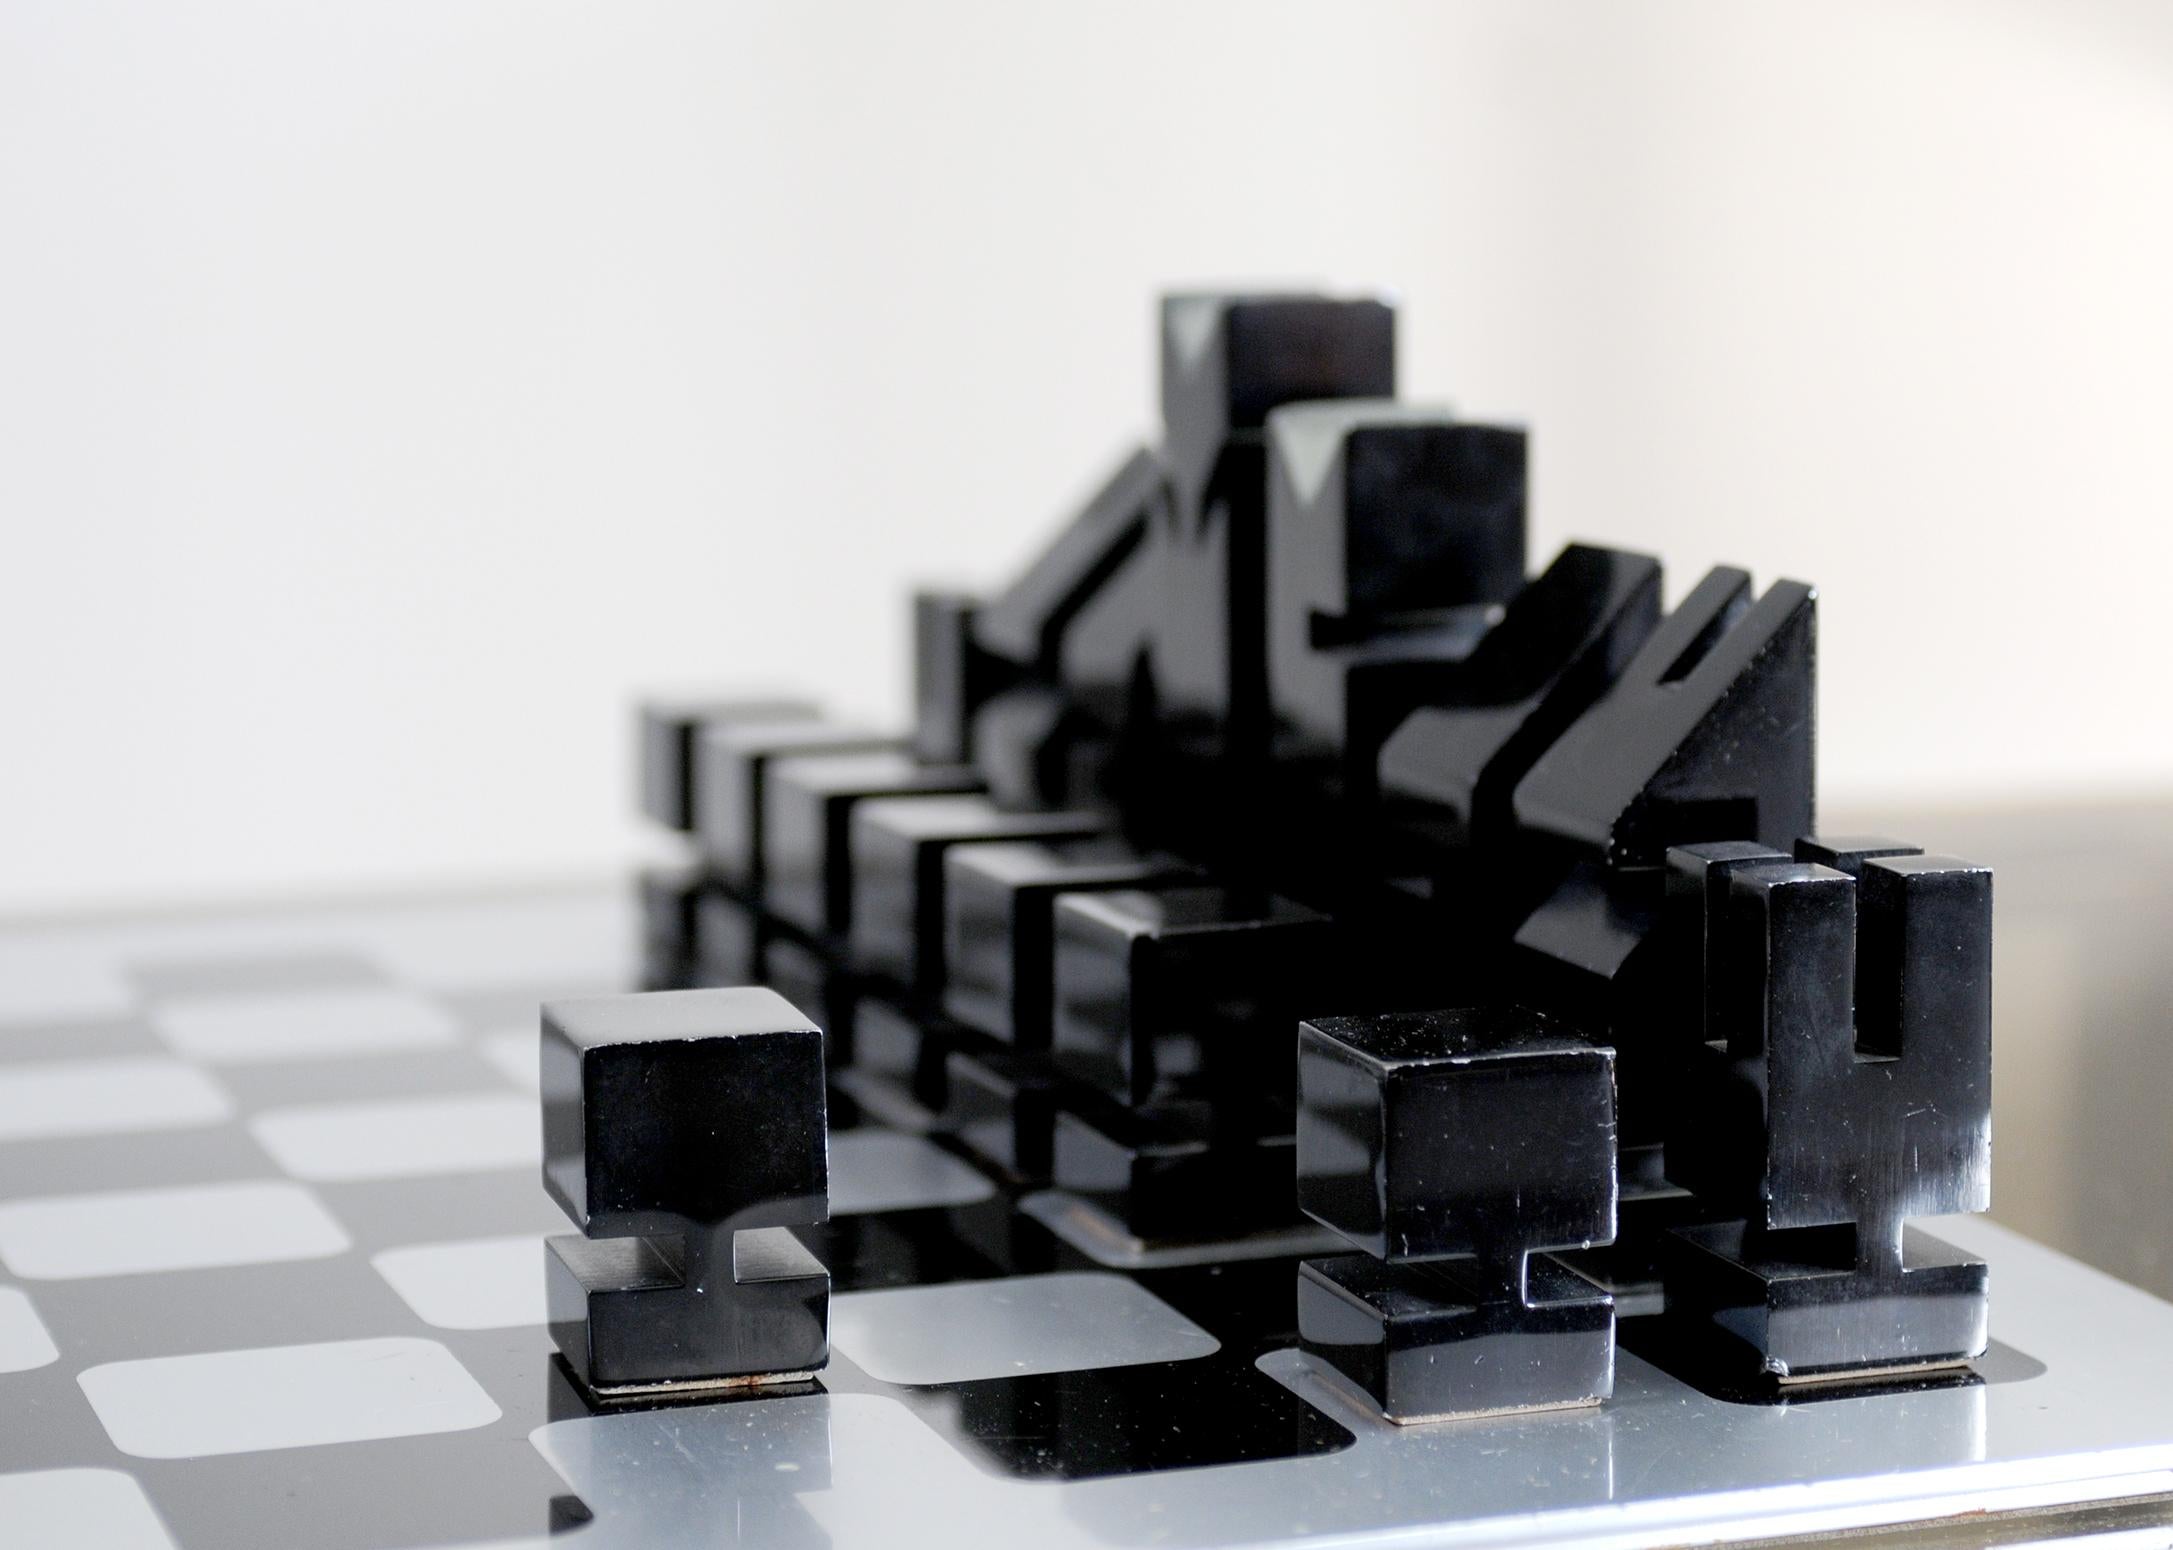 Anodized Chess Set by Walter and Moretti, No. 1 of Pre-Production, France, 1970